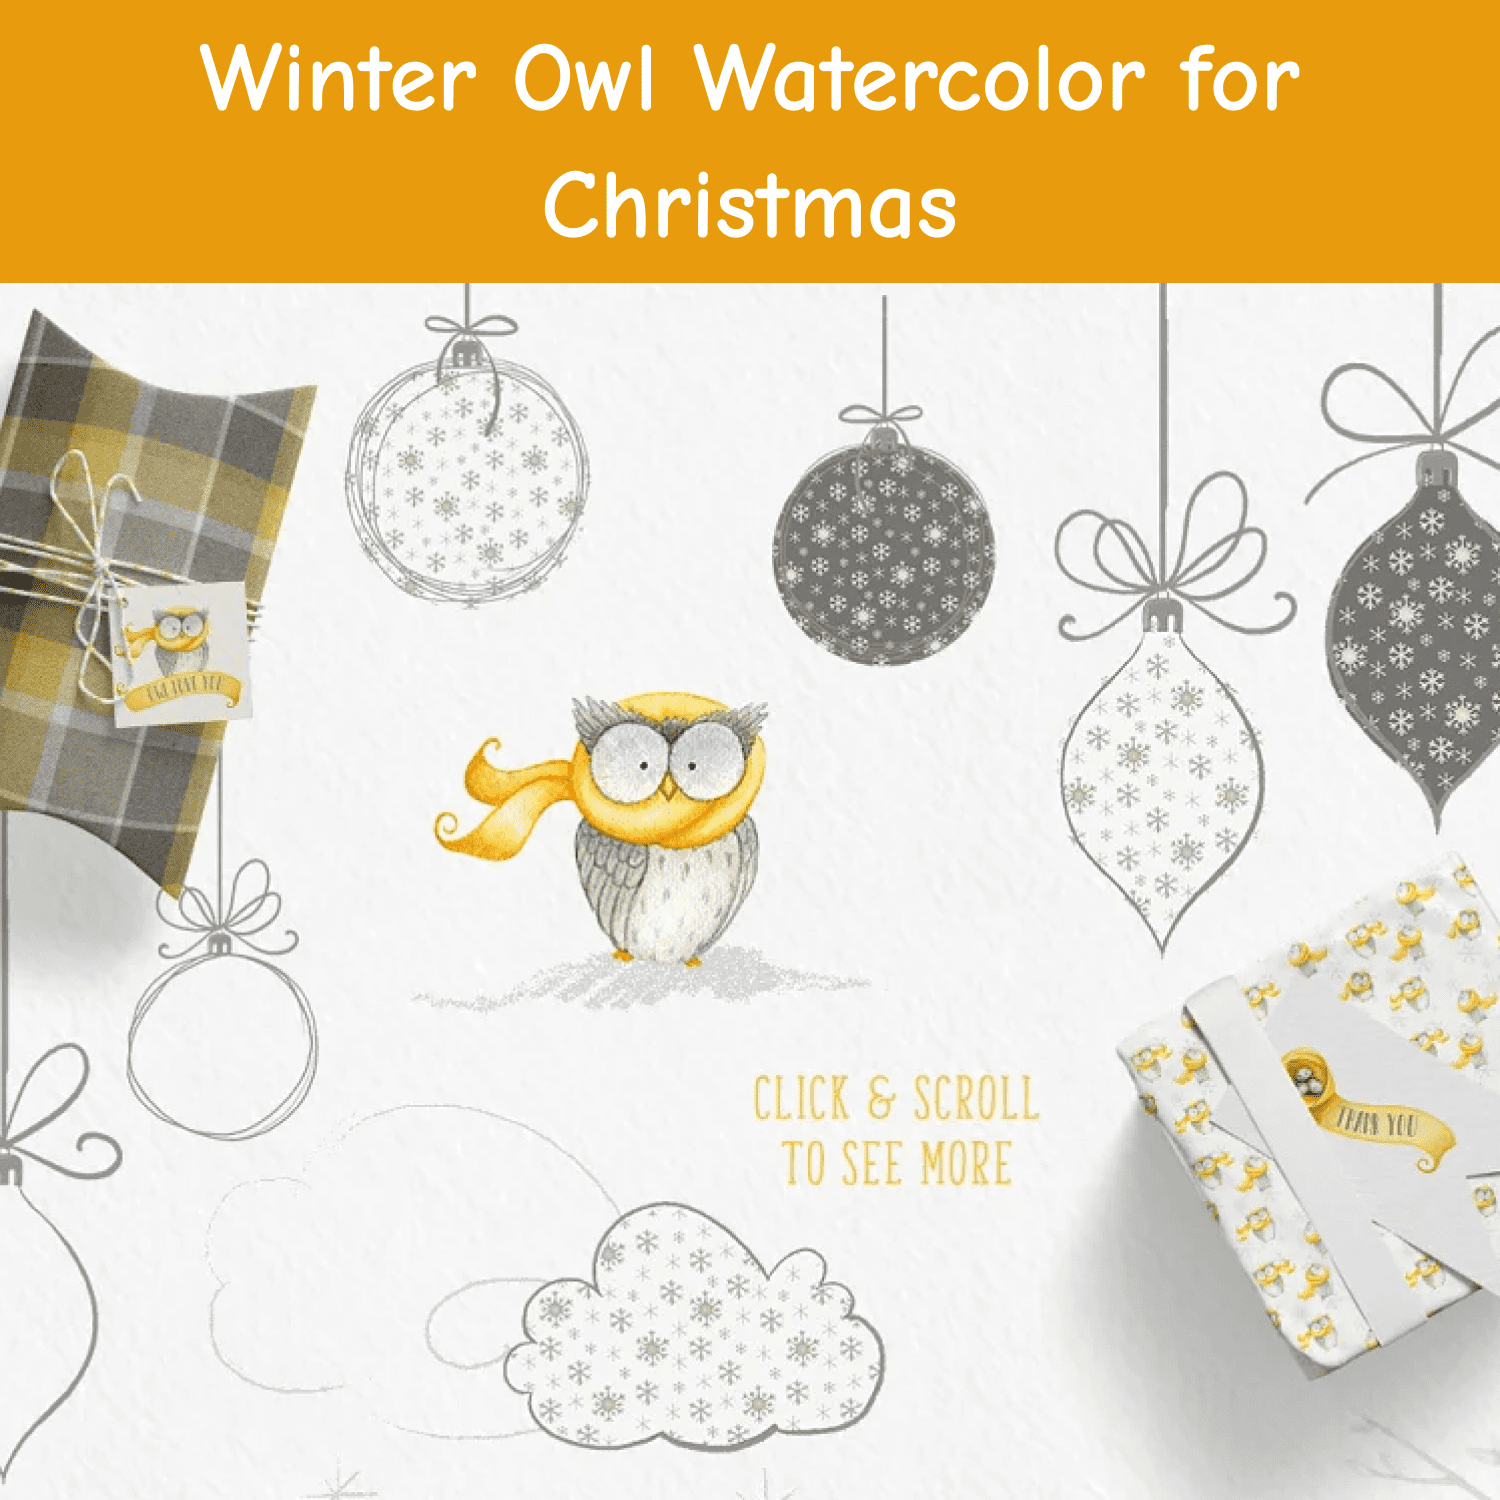 Winter Owl Watercolor for Christmas cover.